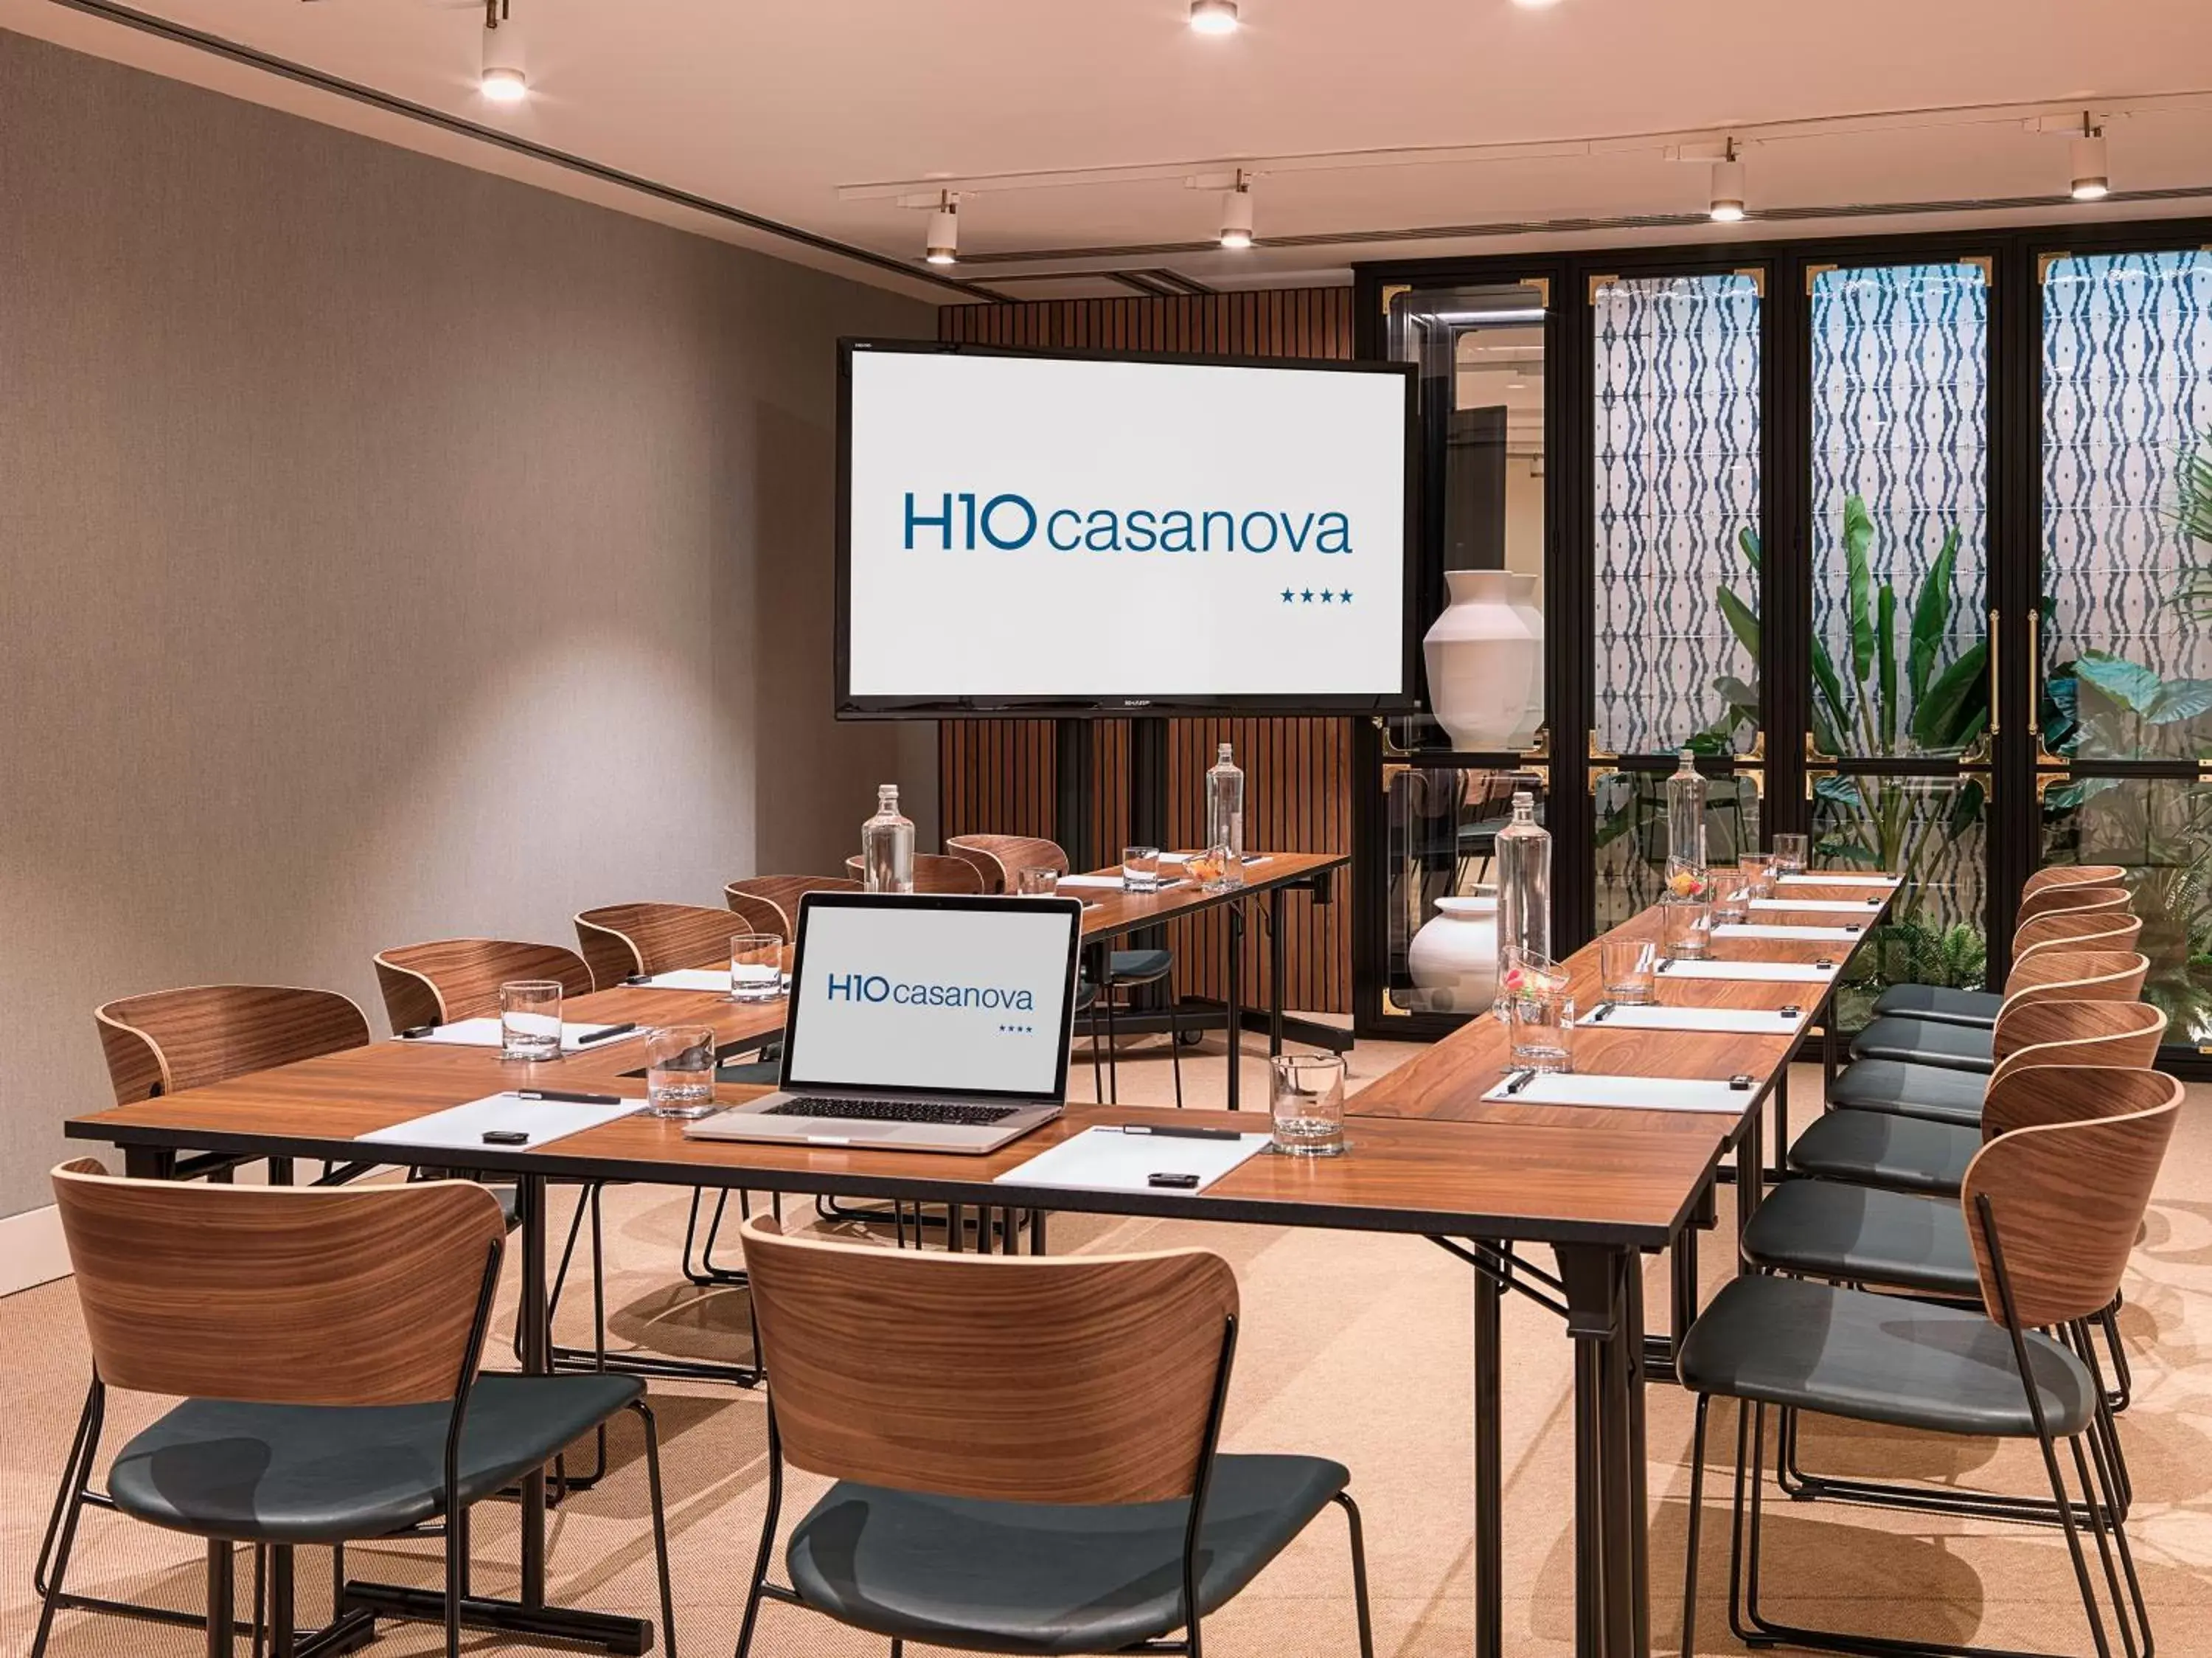 Meeting/conference room in H10 Casanova